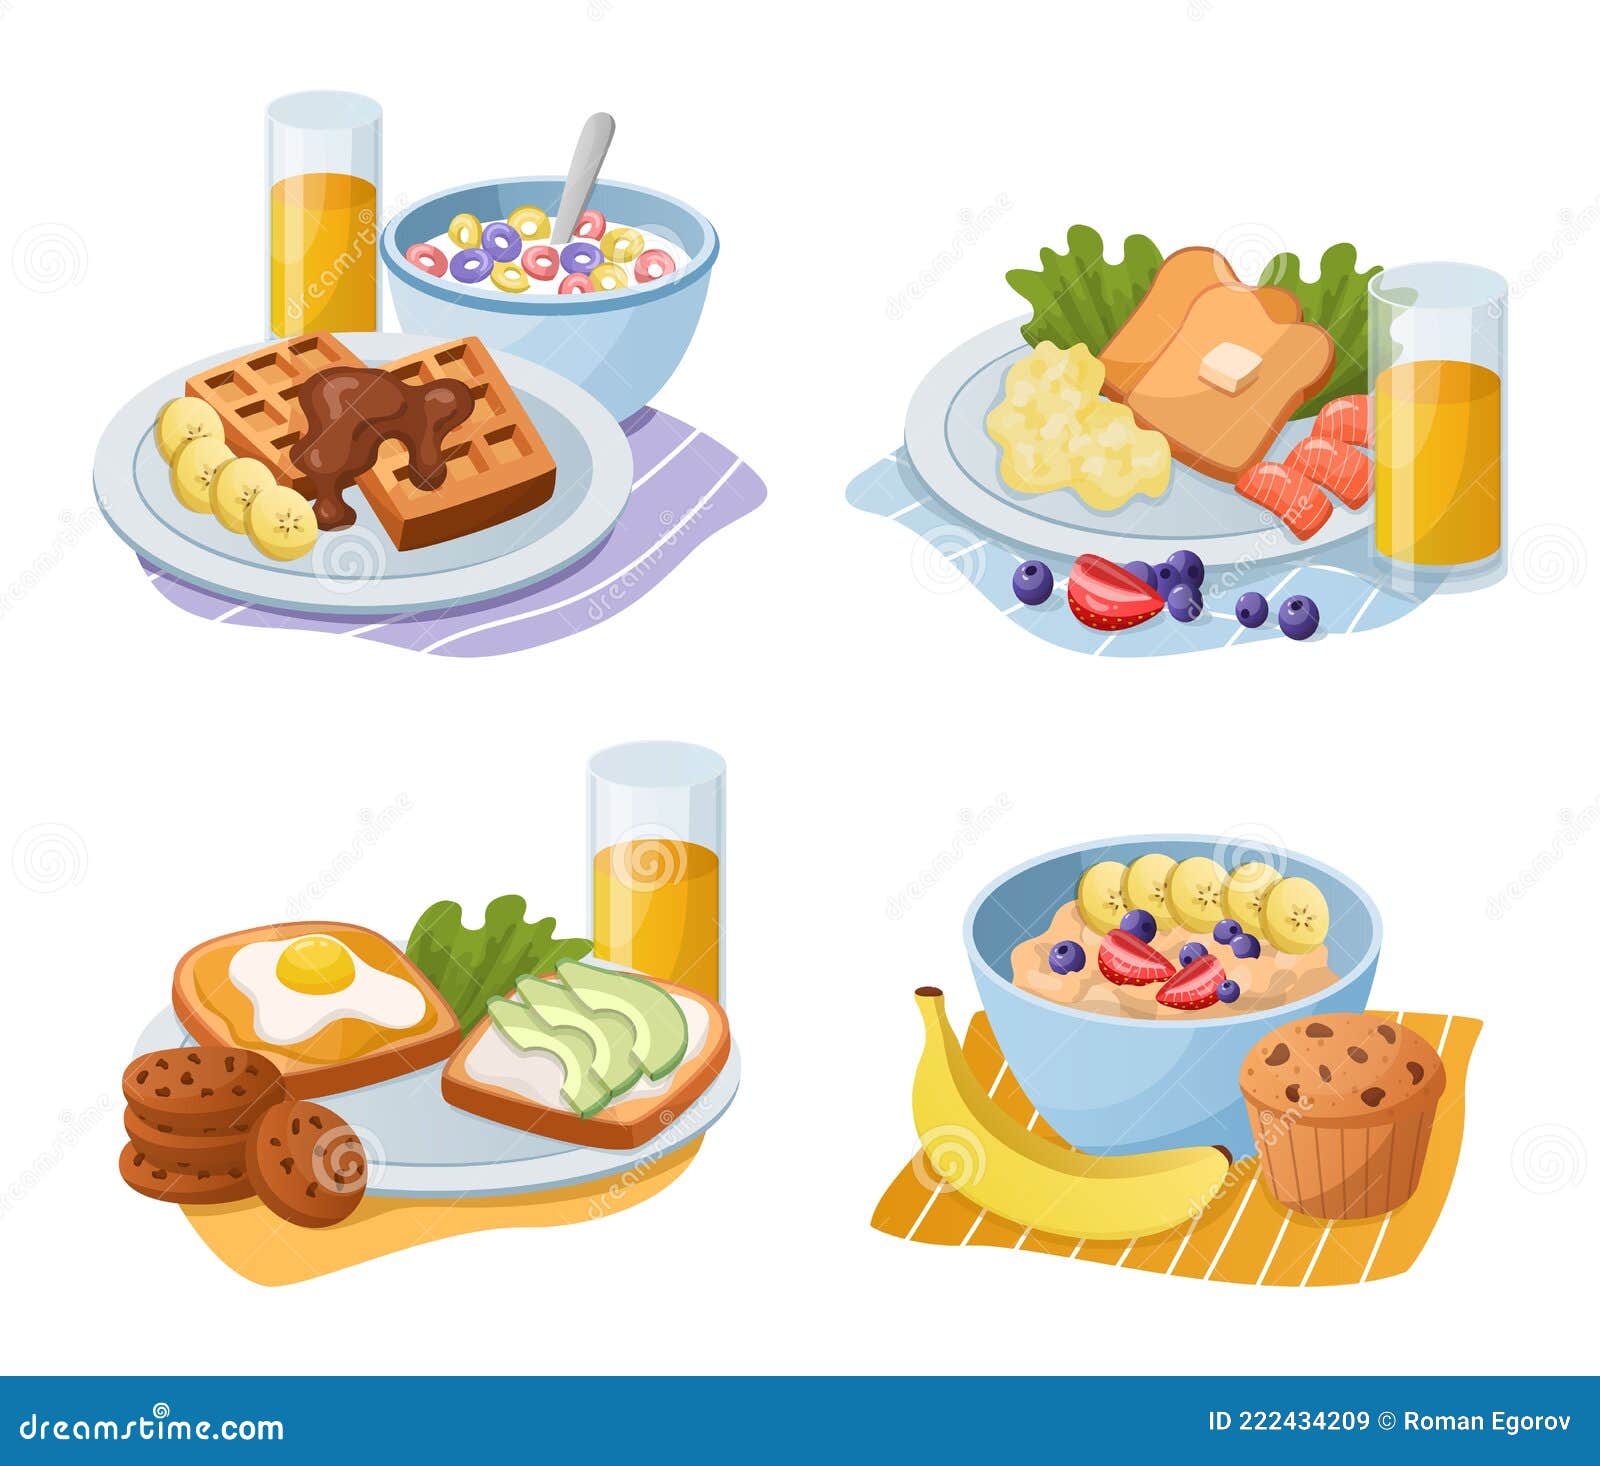 Breakfast Meals. Cartoon Morning Food Types. Serving Lunch with Sandwiches  and Sweet Muffins. Bowl of Muesli or Oatmeal Stock Vector - Illustration of  cookie, cooking: 222434209